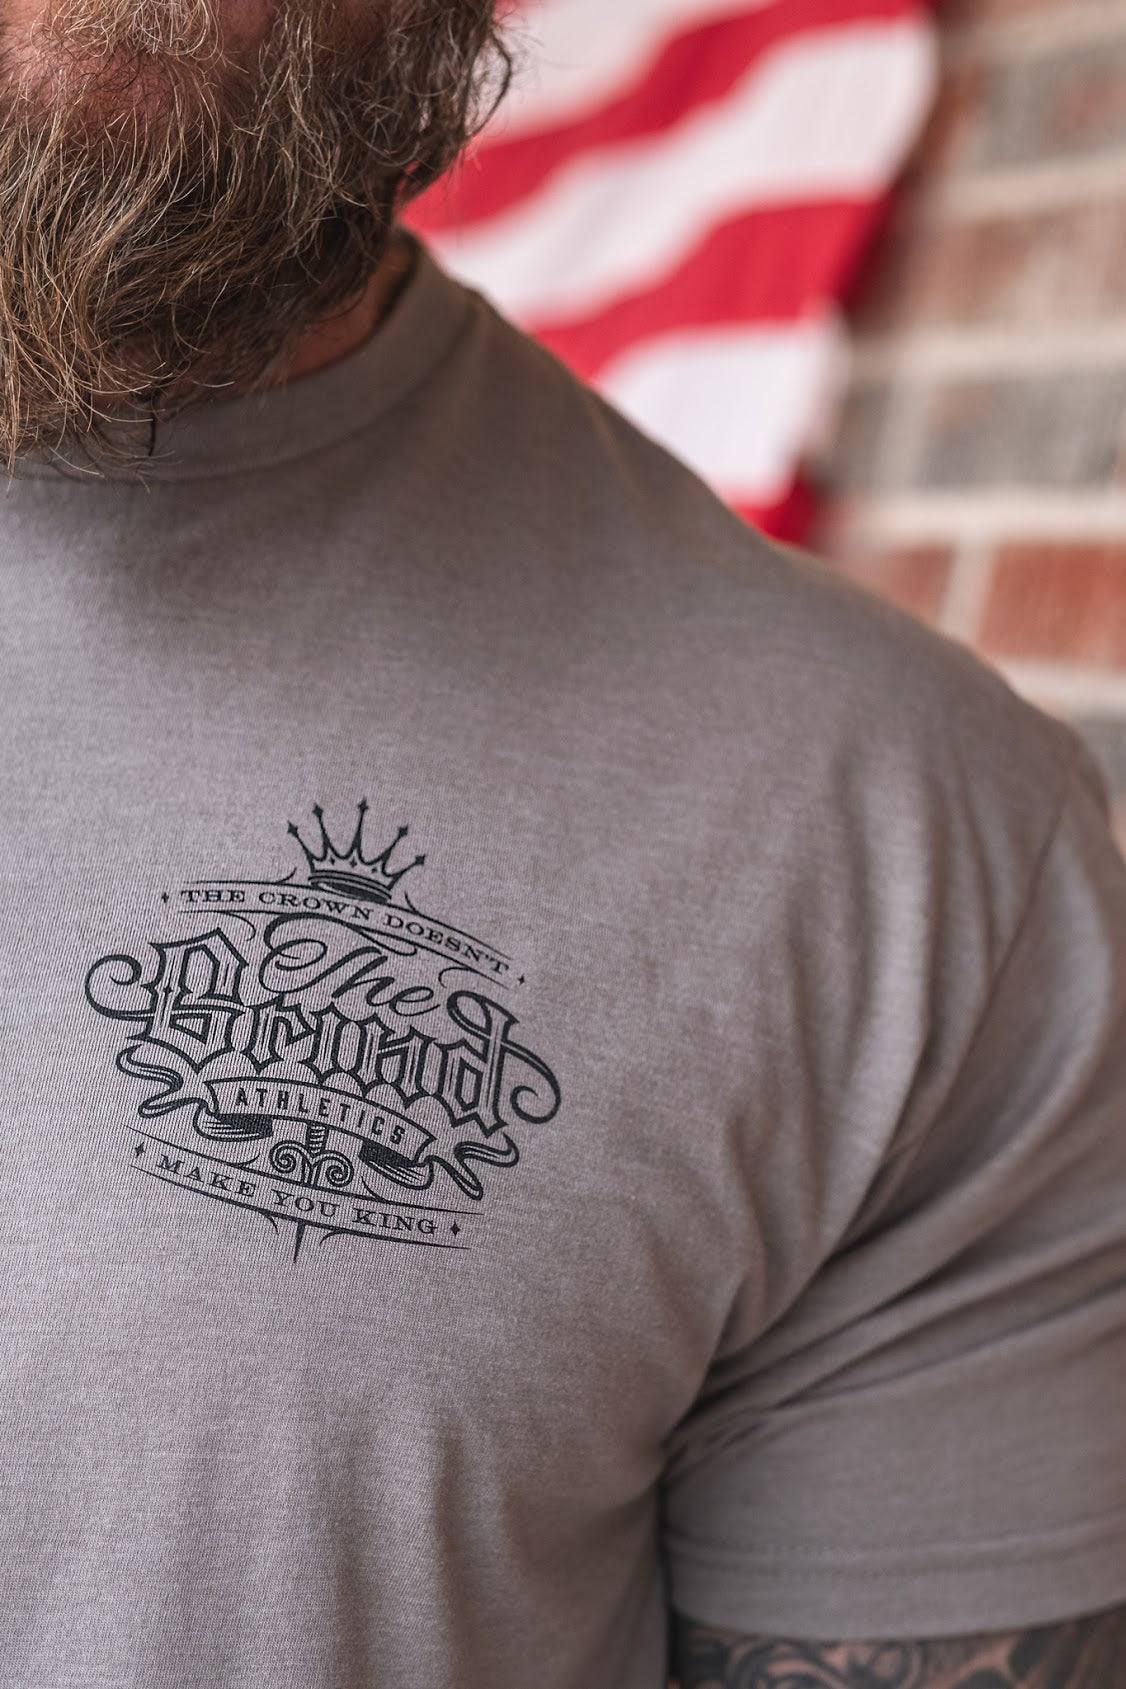 The Grind Athletics The Crown Doesn't Make You King - Second Edition